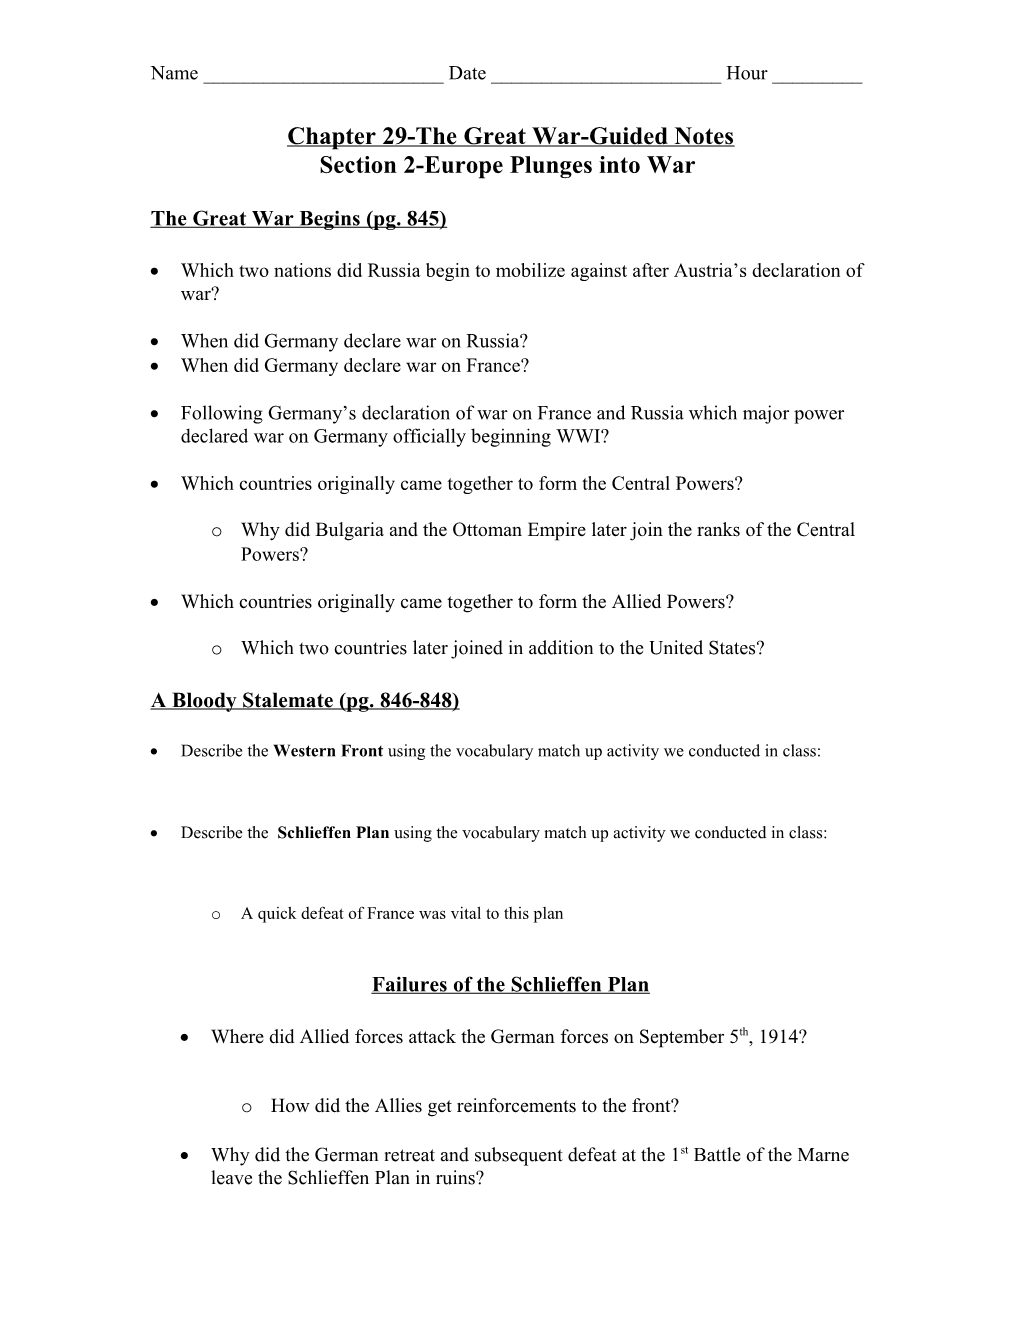 Chapter 22-Enlightenment and Revolution-Guided Notes s2